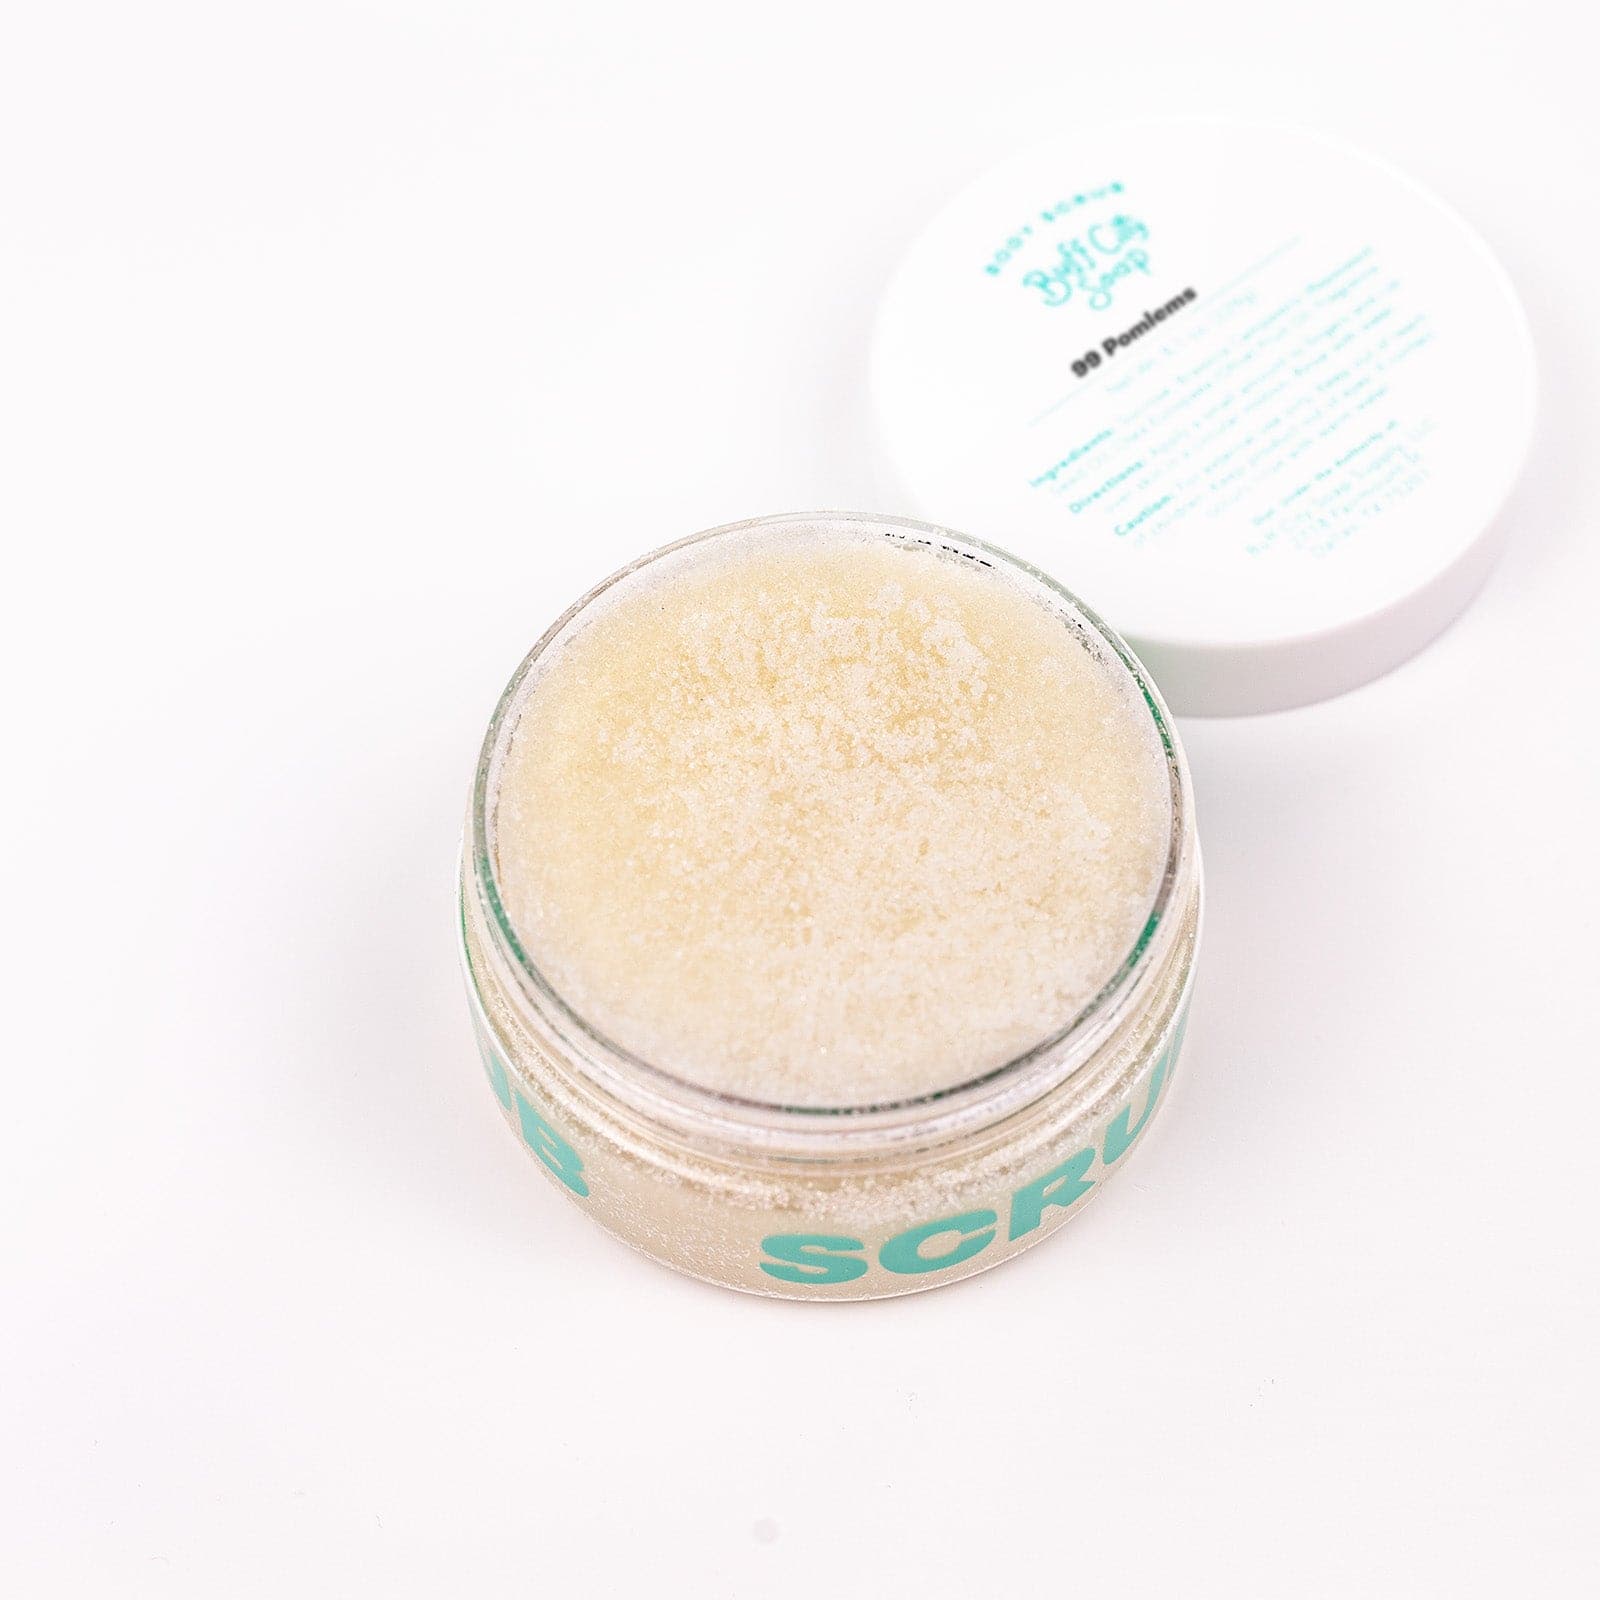 Clear Body Scrub container with lid open against white background shot from above